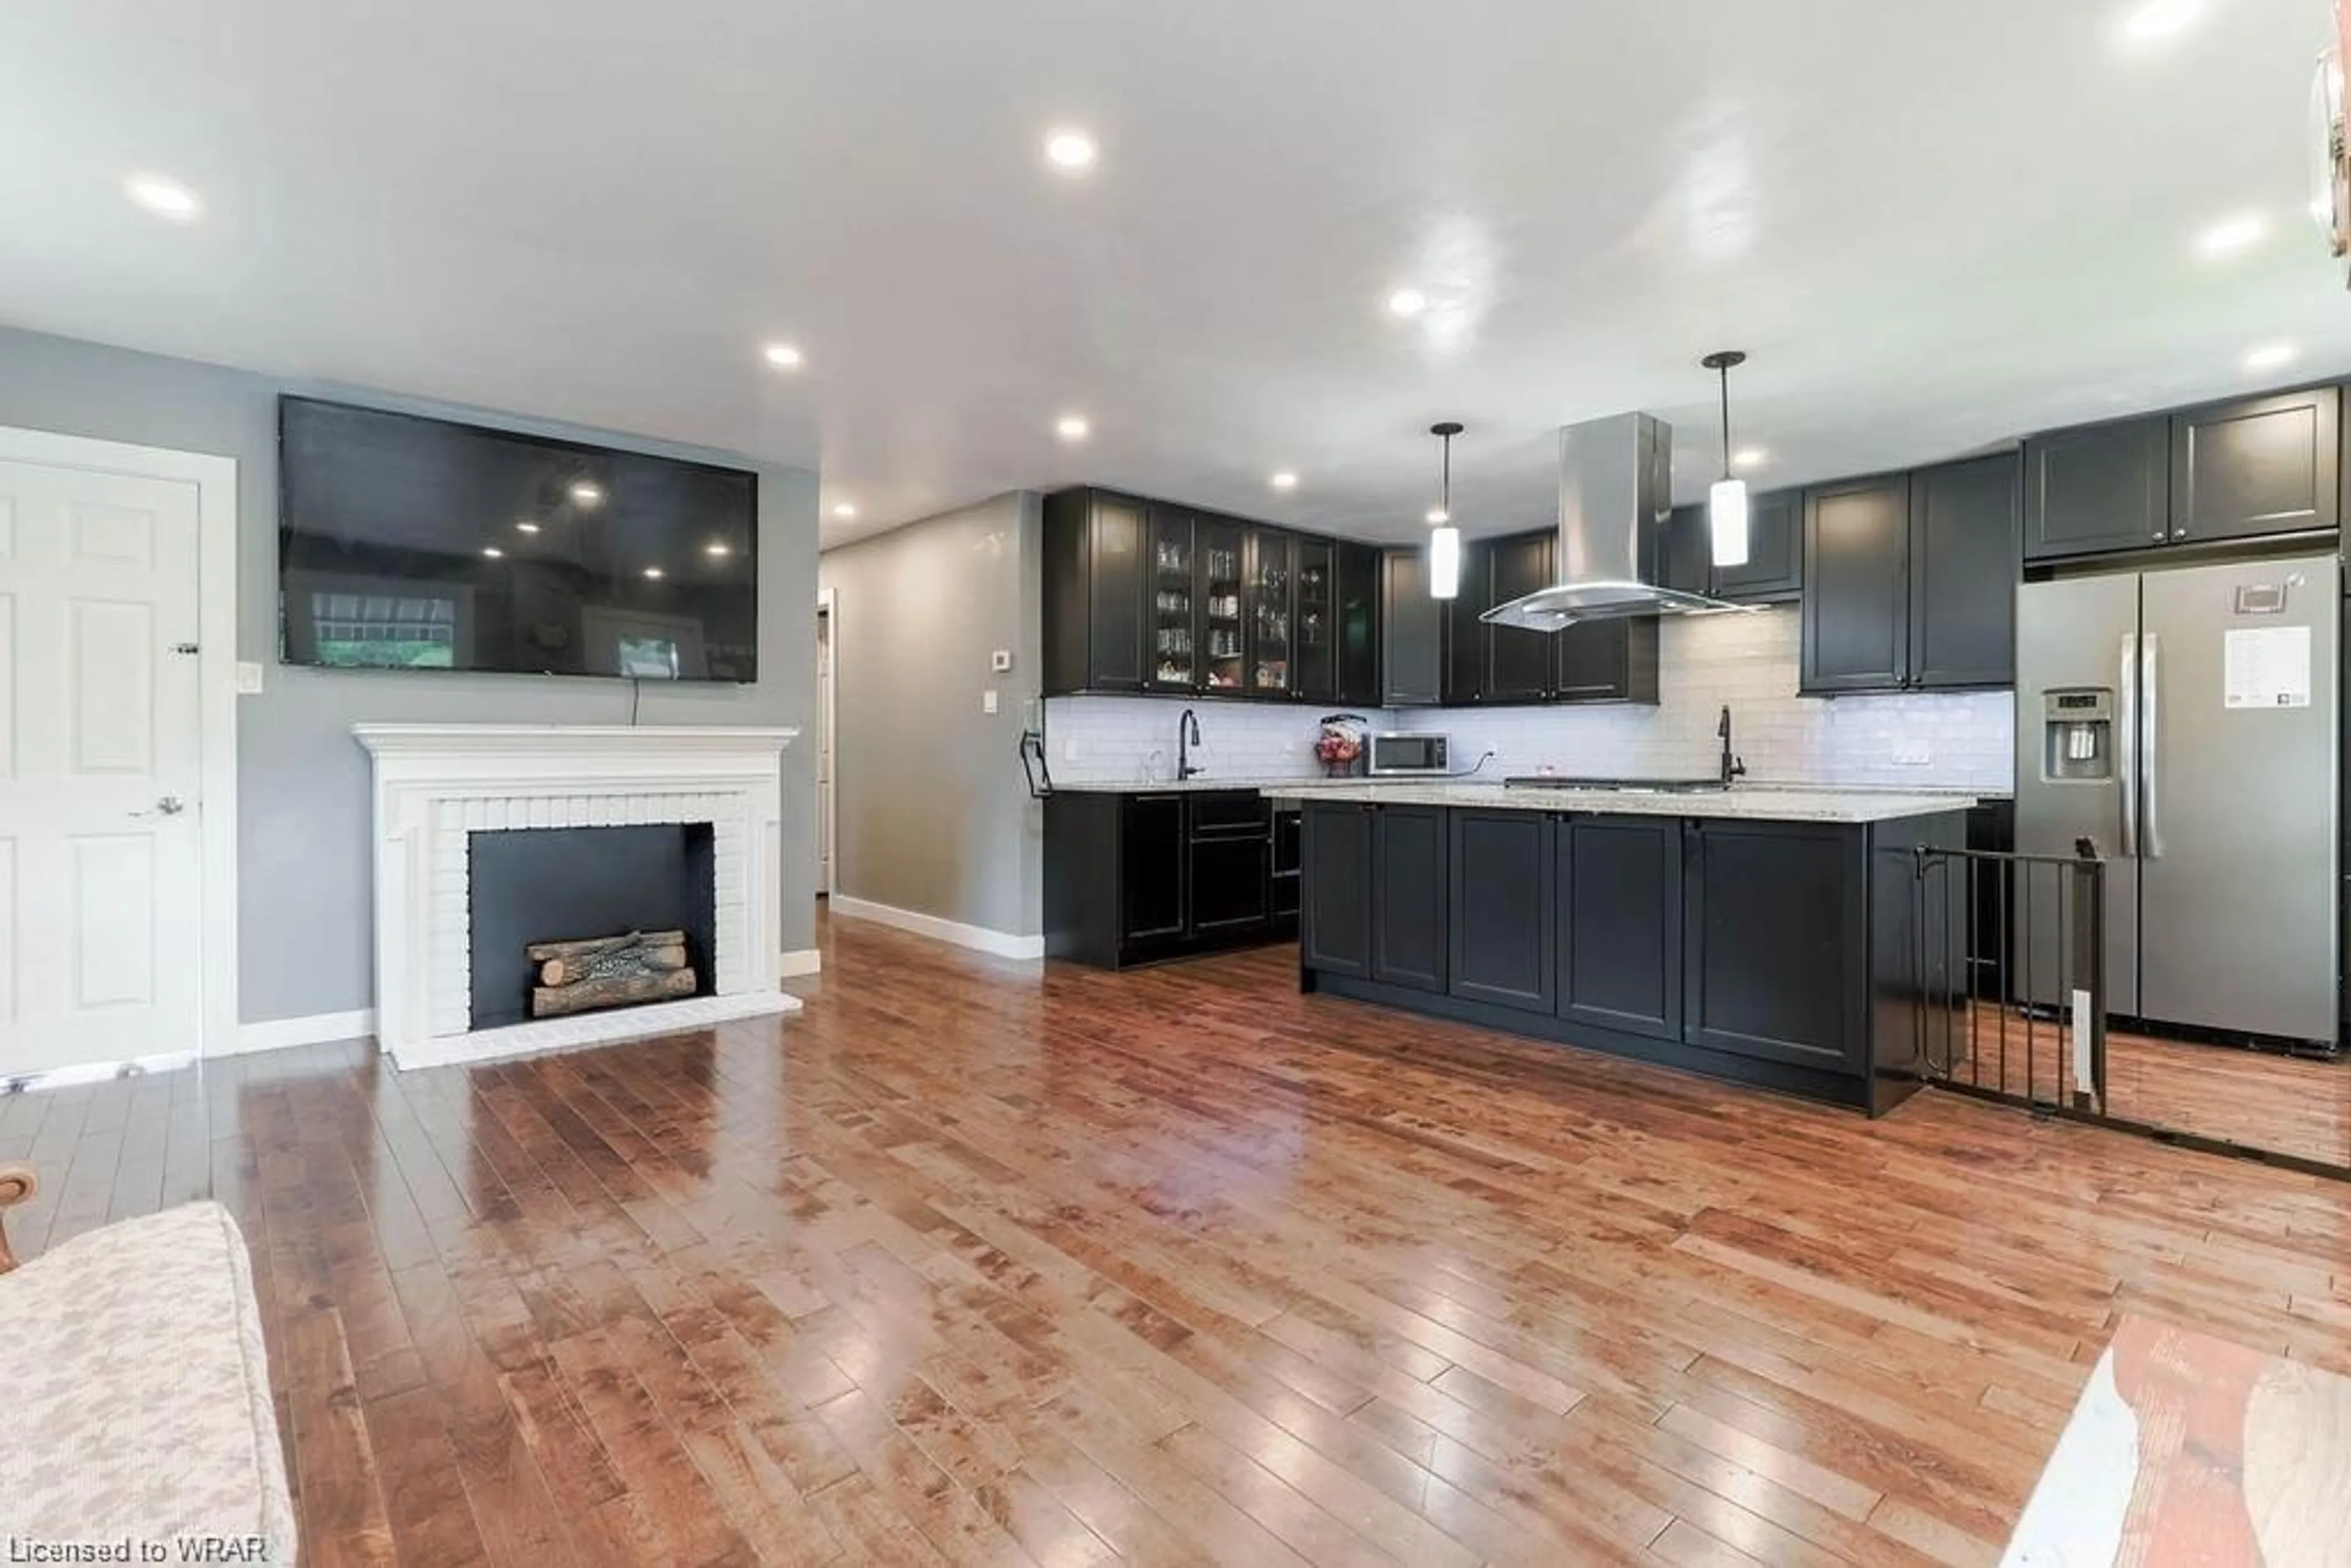 Contemporary kitchen for 1114 Gatewood Rd, London Ontario N5Y 4Z5